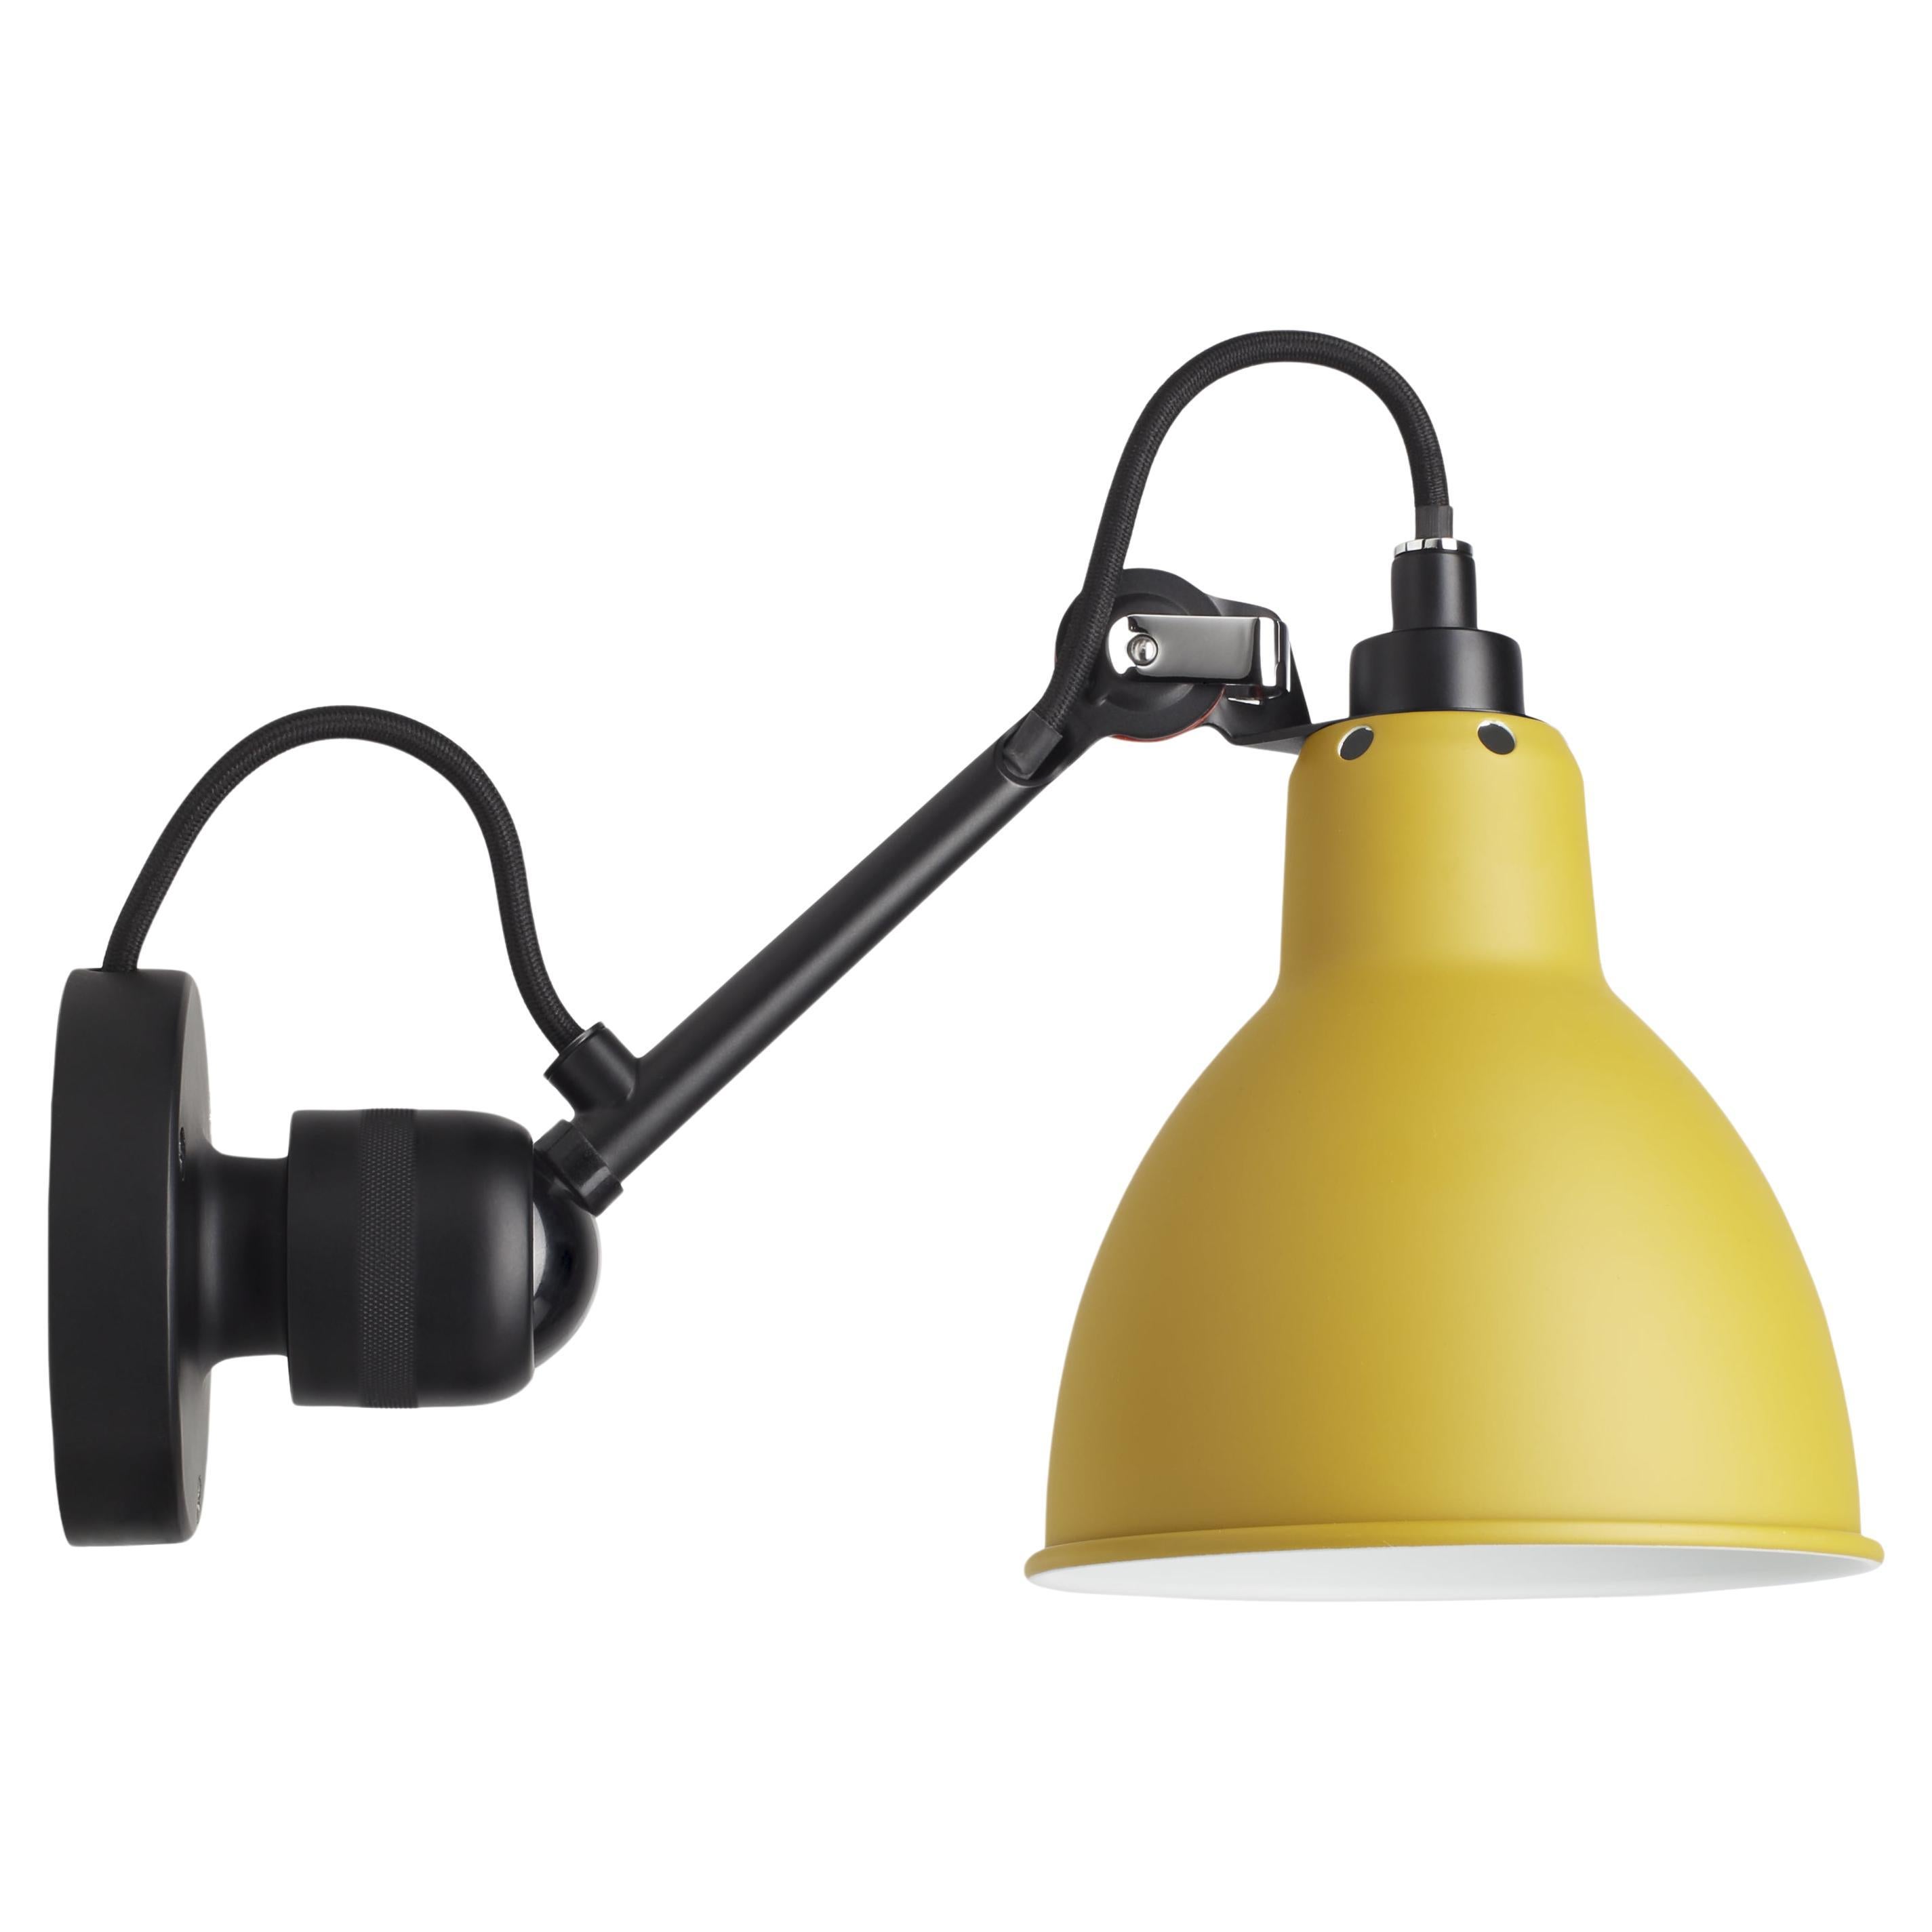 DCW Editions La Lampe Gras N°304 Wall Lamp in Black Arm and Yellow Shade